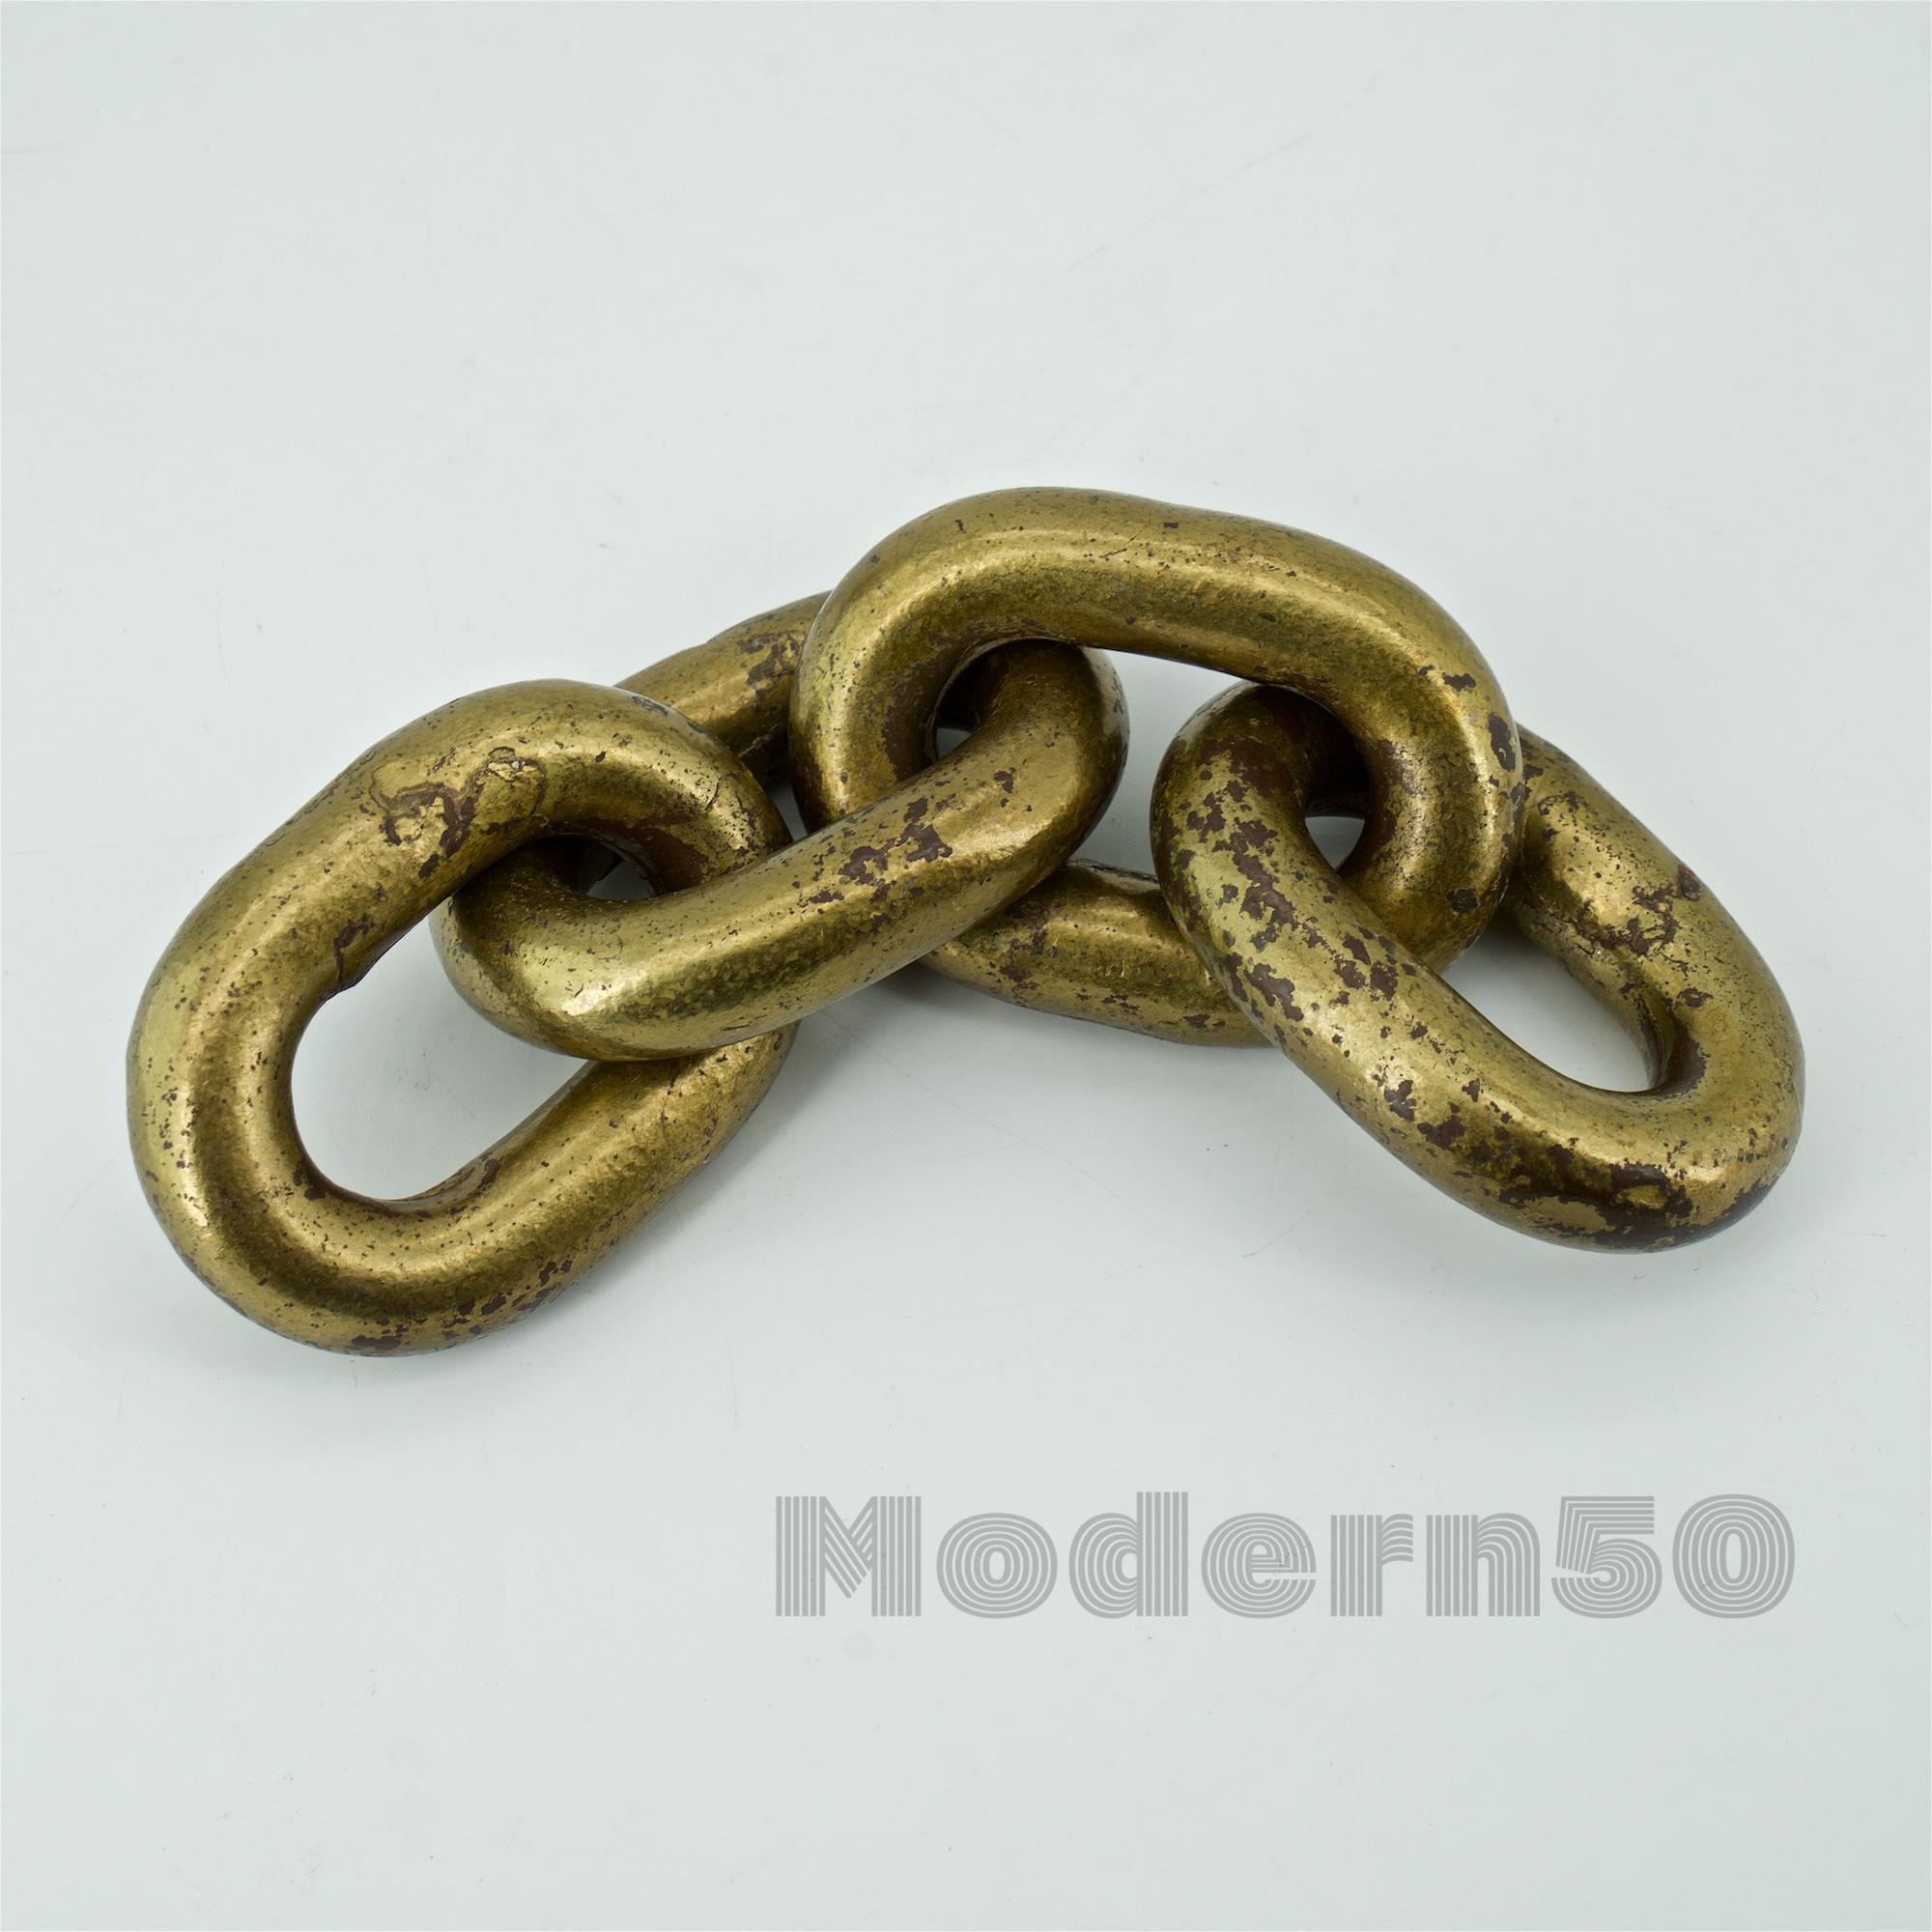 Sought after early chain paperweight, golden brass plated, and lacquered steel by Werkstätte Carl Auböck, Austria, circa 1950s. Heavily worn, showing a wonderful patina and age. Weight: 2 1/4 lbs. Length 8 in.
  